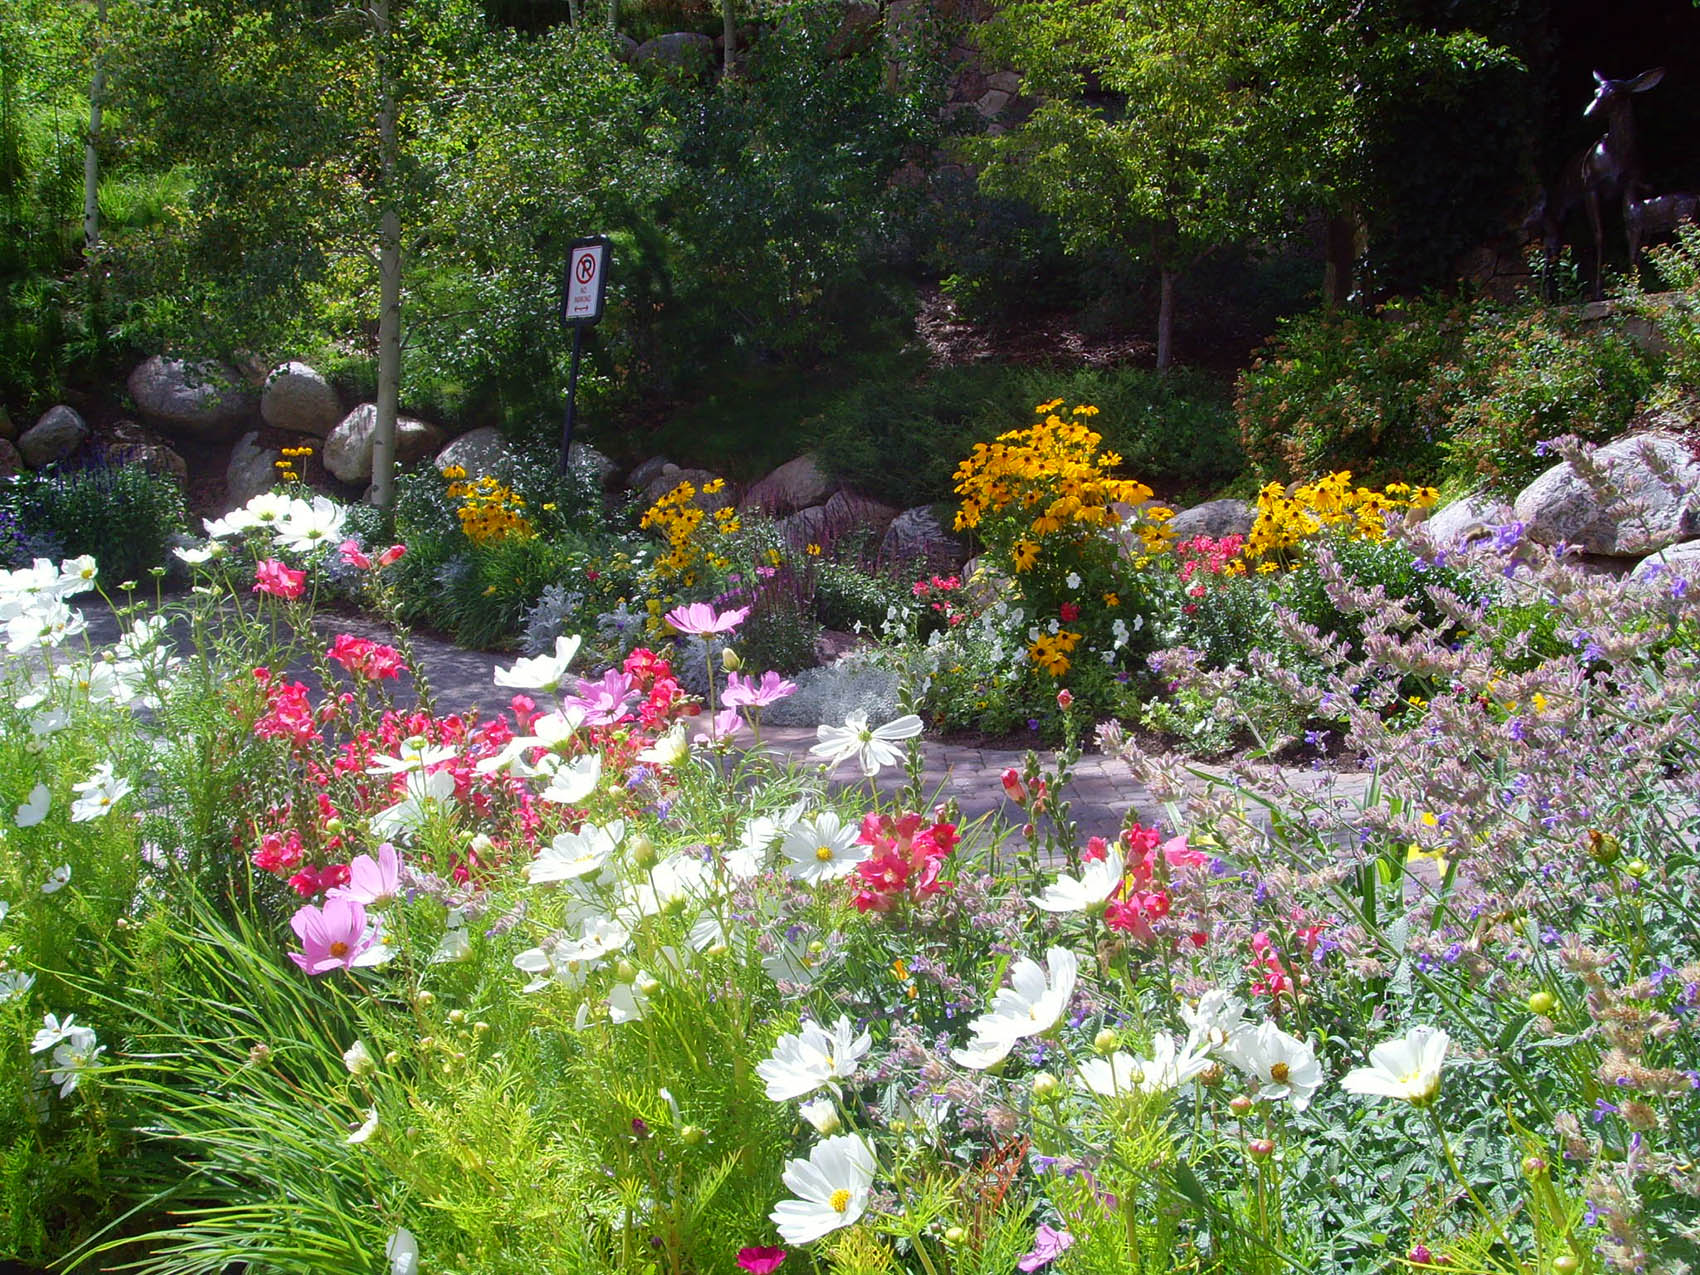 This image showcases a vibrant garden with an abundance of colorful flowers, a footpath, boulders, green foliage, and a statue resembling a deer.